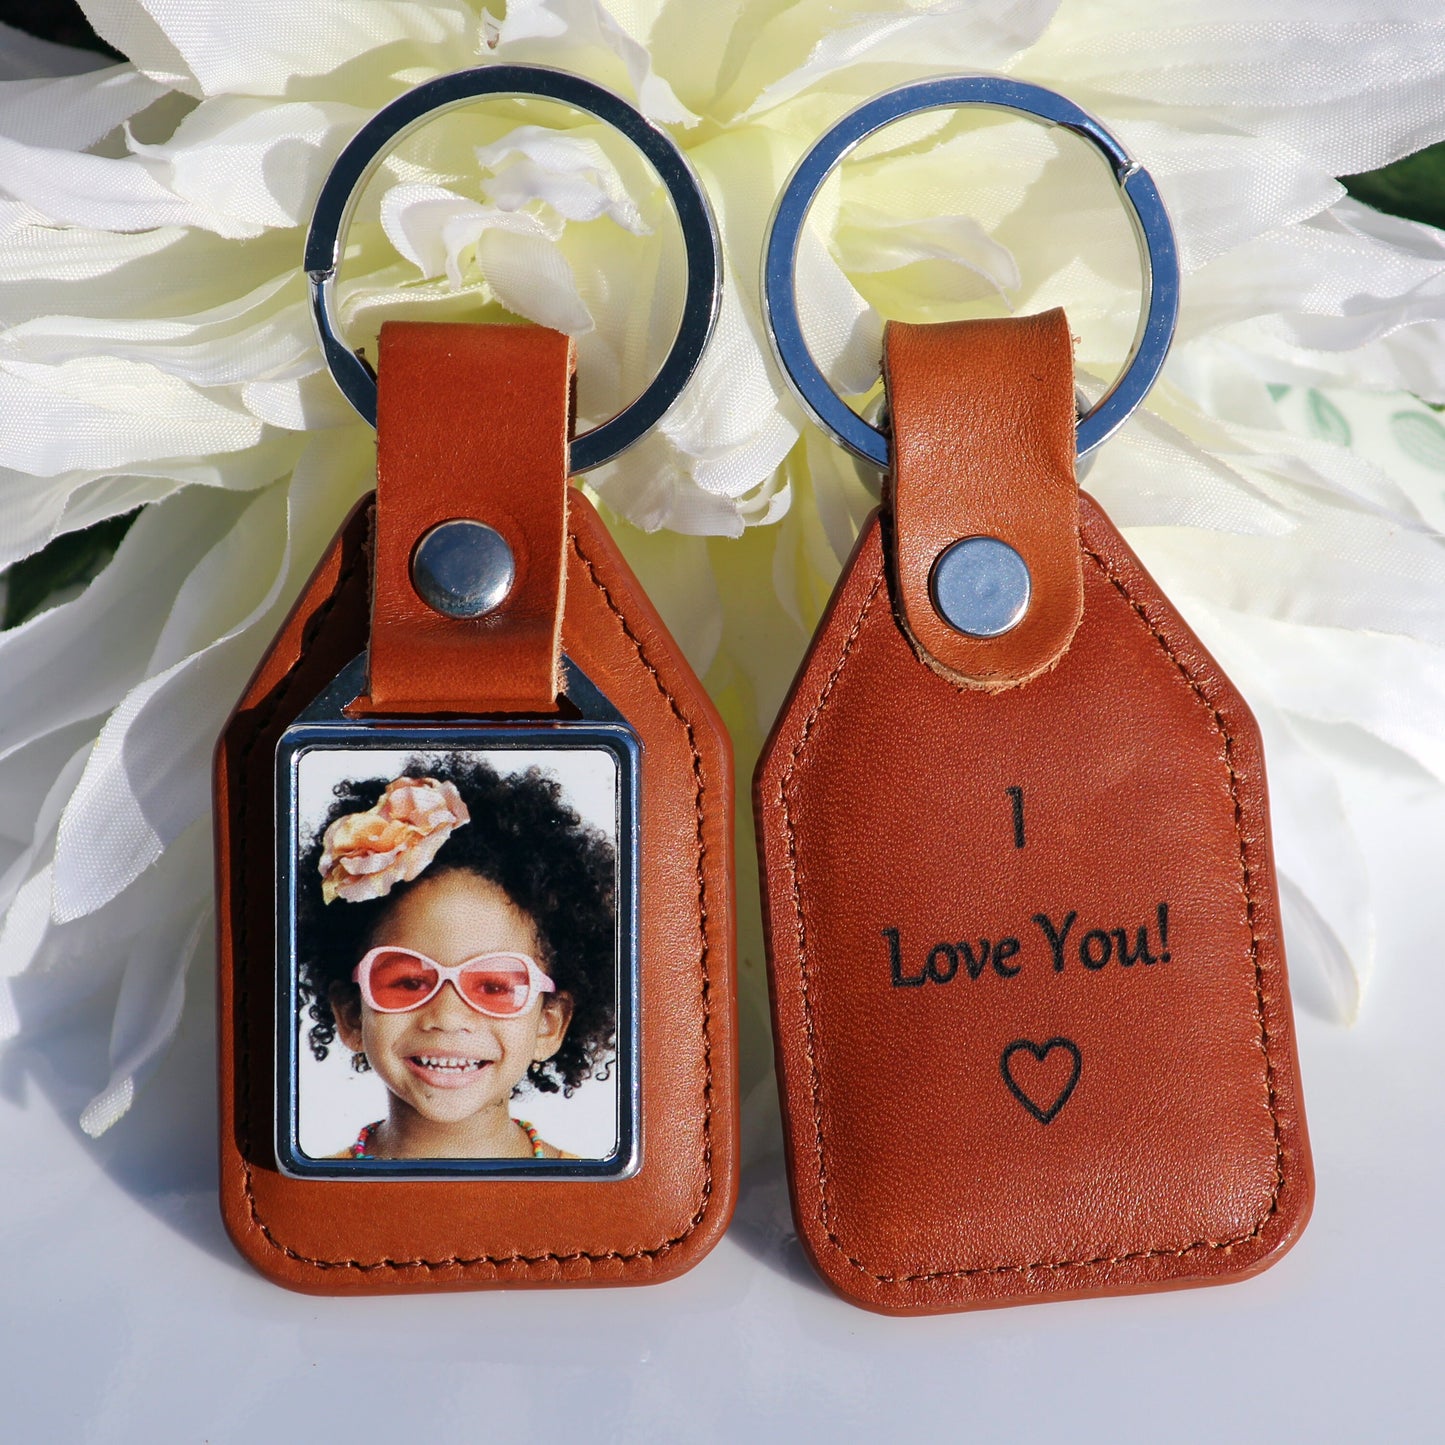 Photo Key Ring,Personalized Keychains,Double Sided Photo Keychain, Drive Safe, Leather Key Holder, Fathers Day, Mothers Day Gift